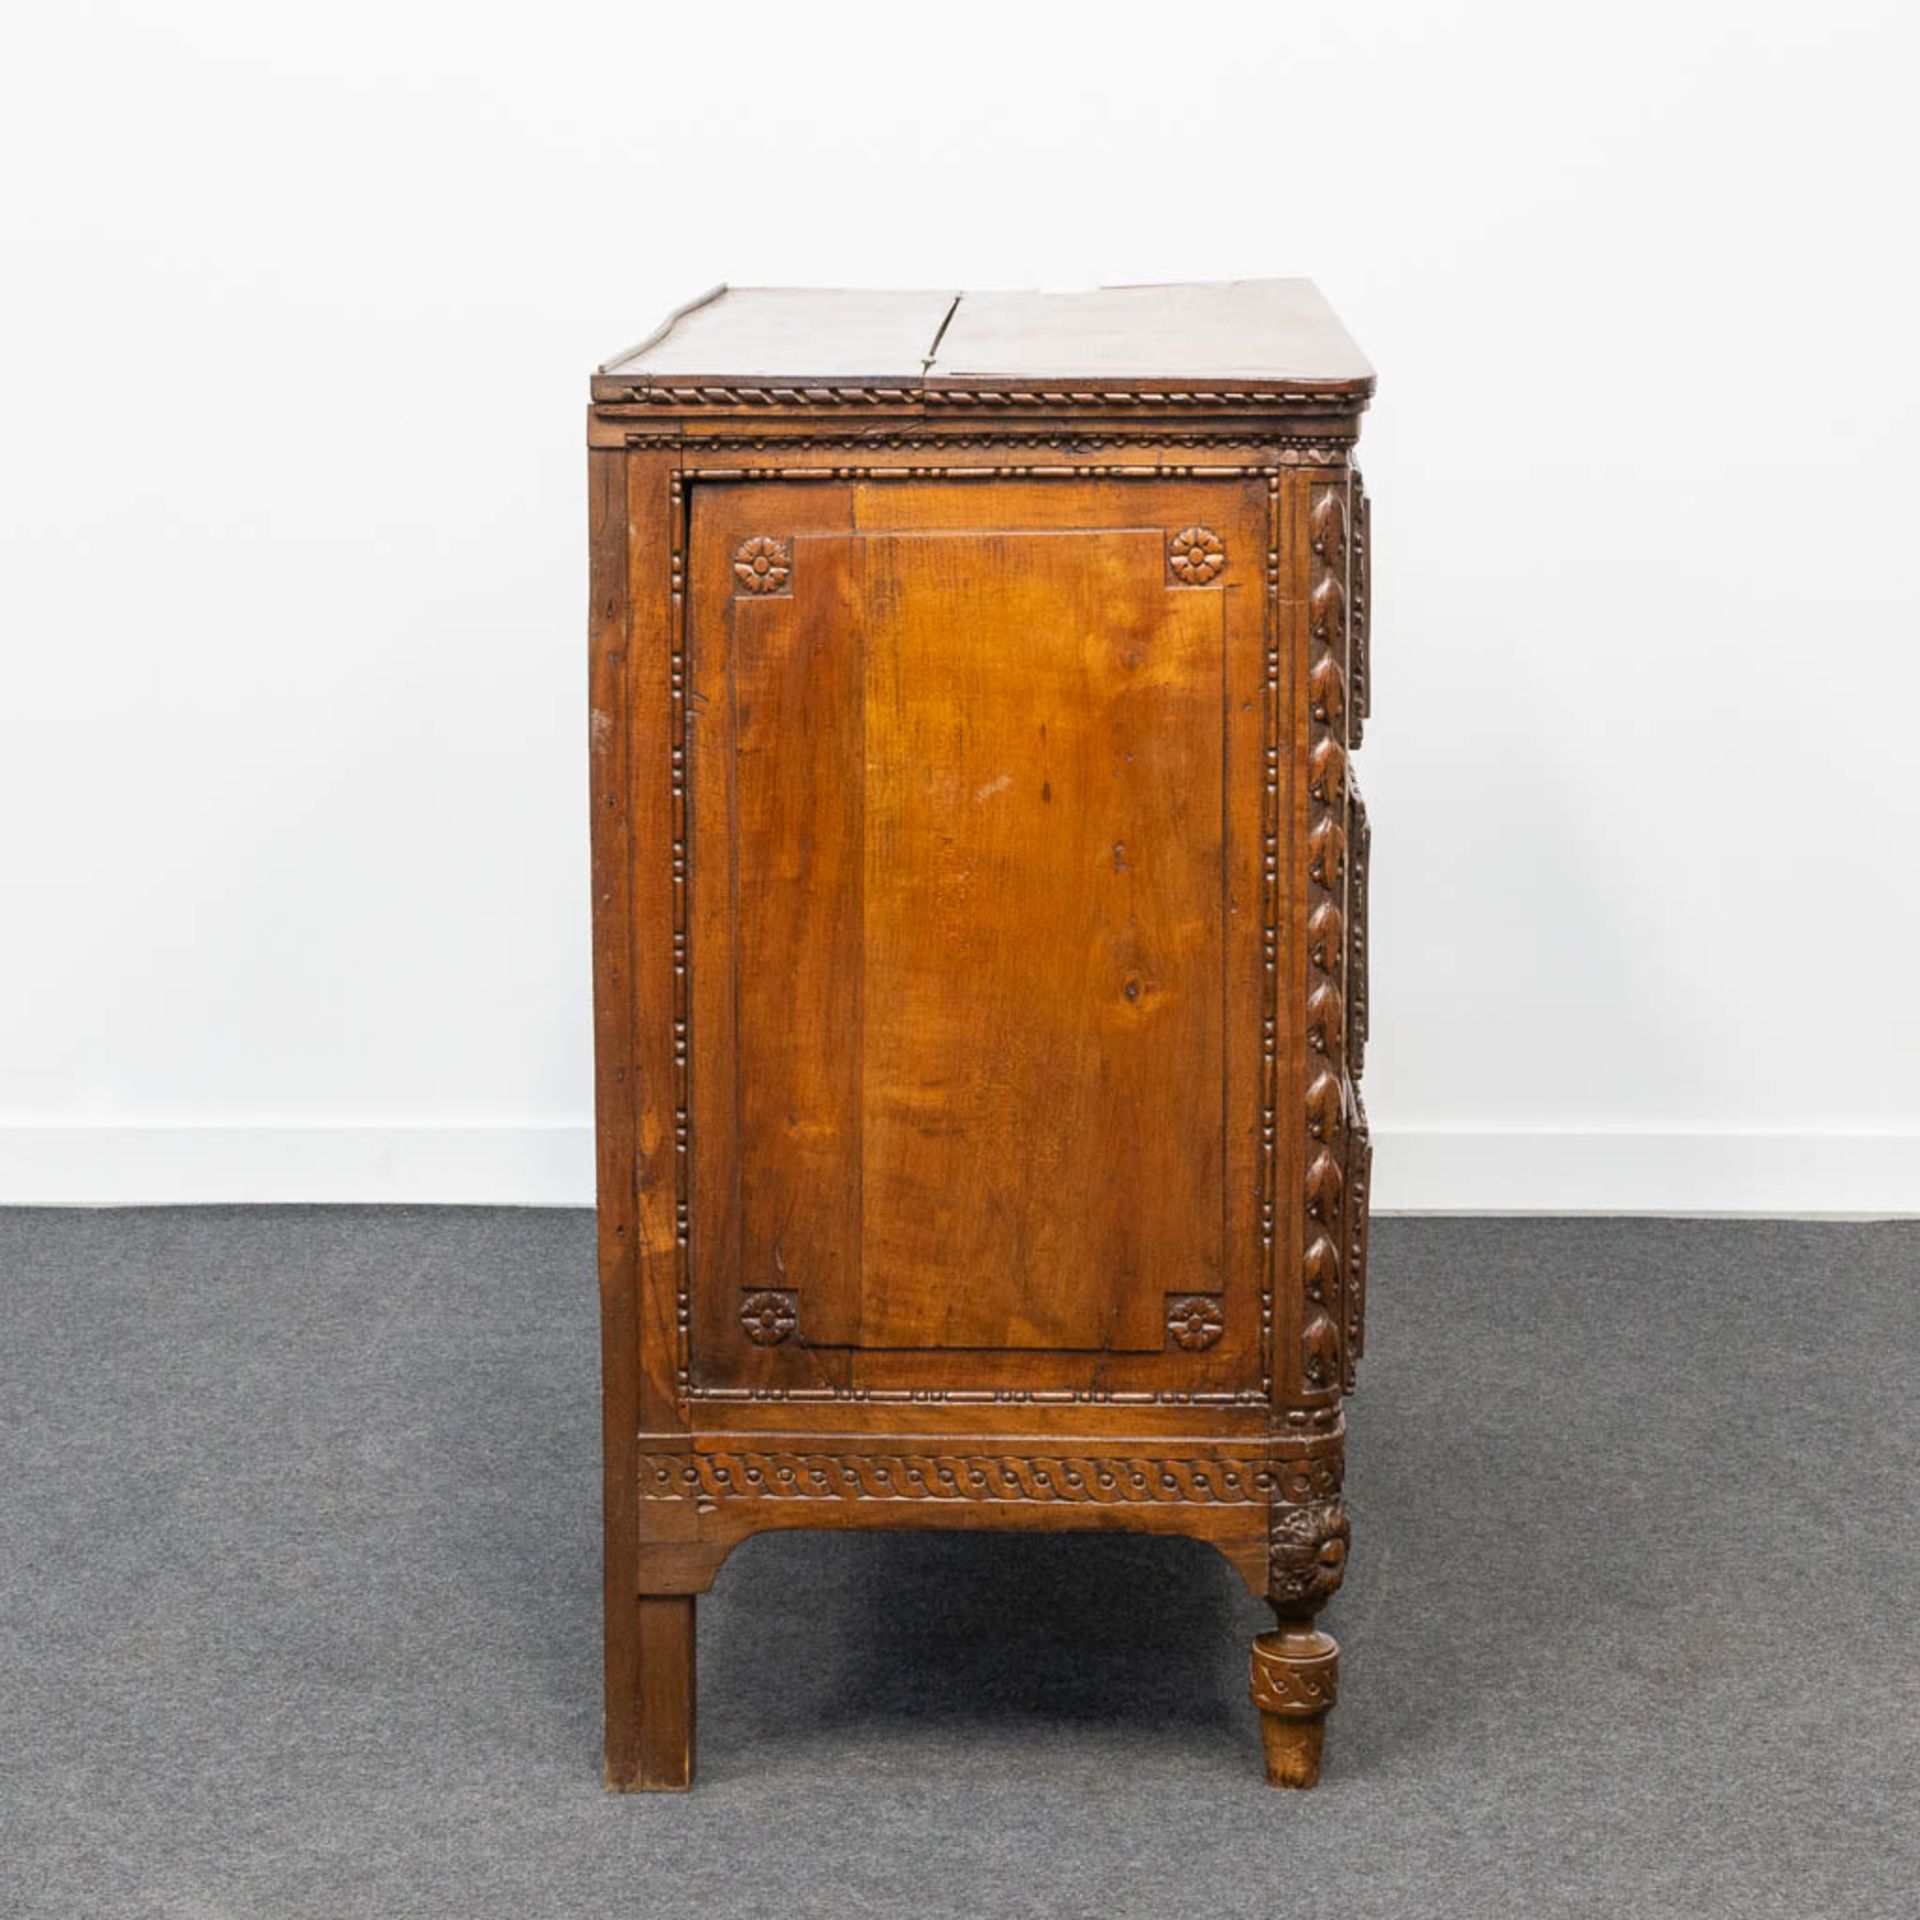 A wood sculptured commode in Louis XVI style, with 3 drawers and a hidden desk. 18th century. - Bild 5 aus 23